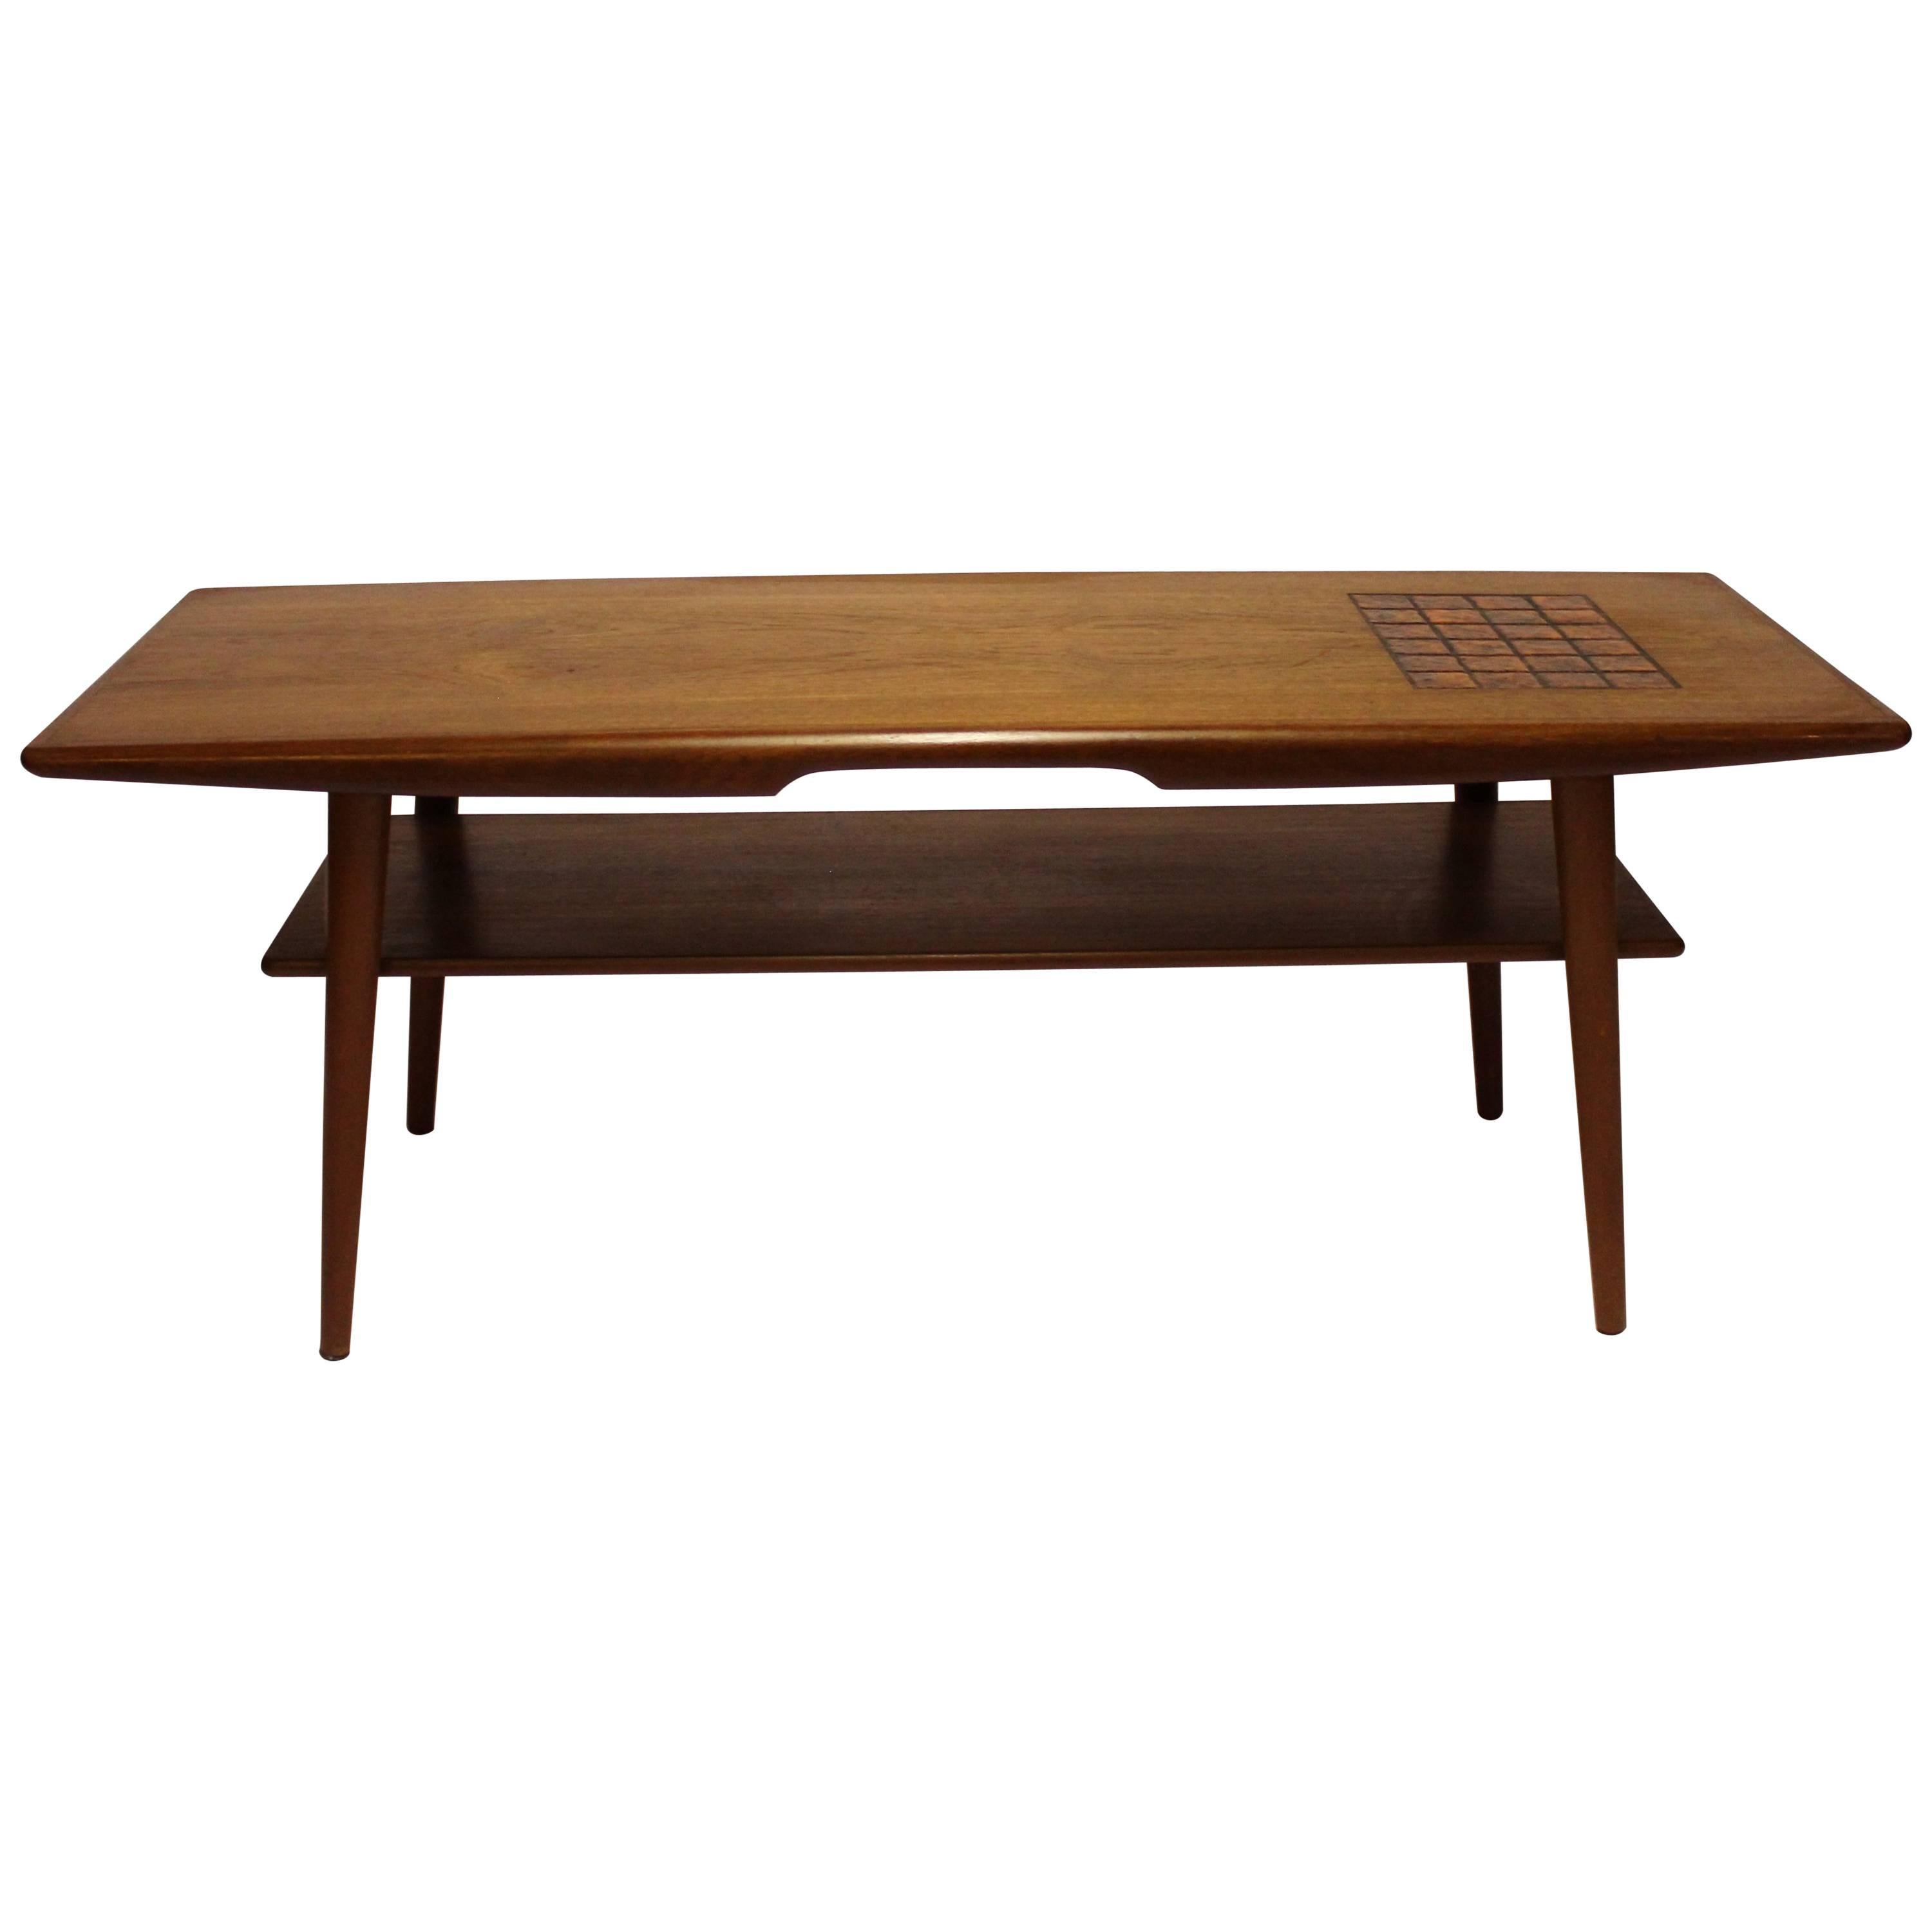 Coffee Table in Teak with Tiles in Dark Colors of Danish Design, 1960s For Sale